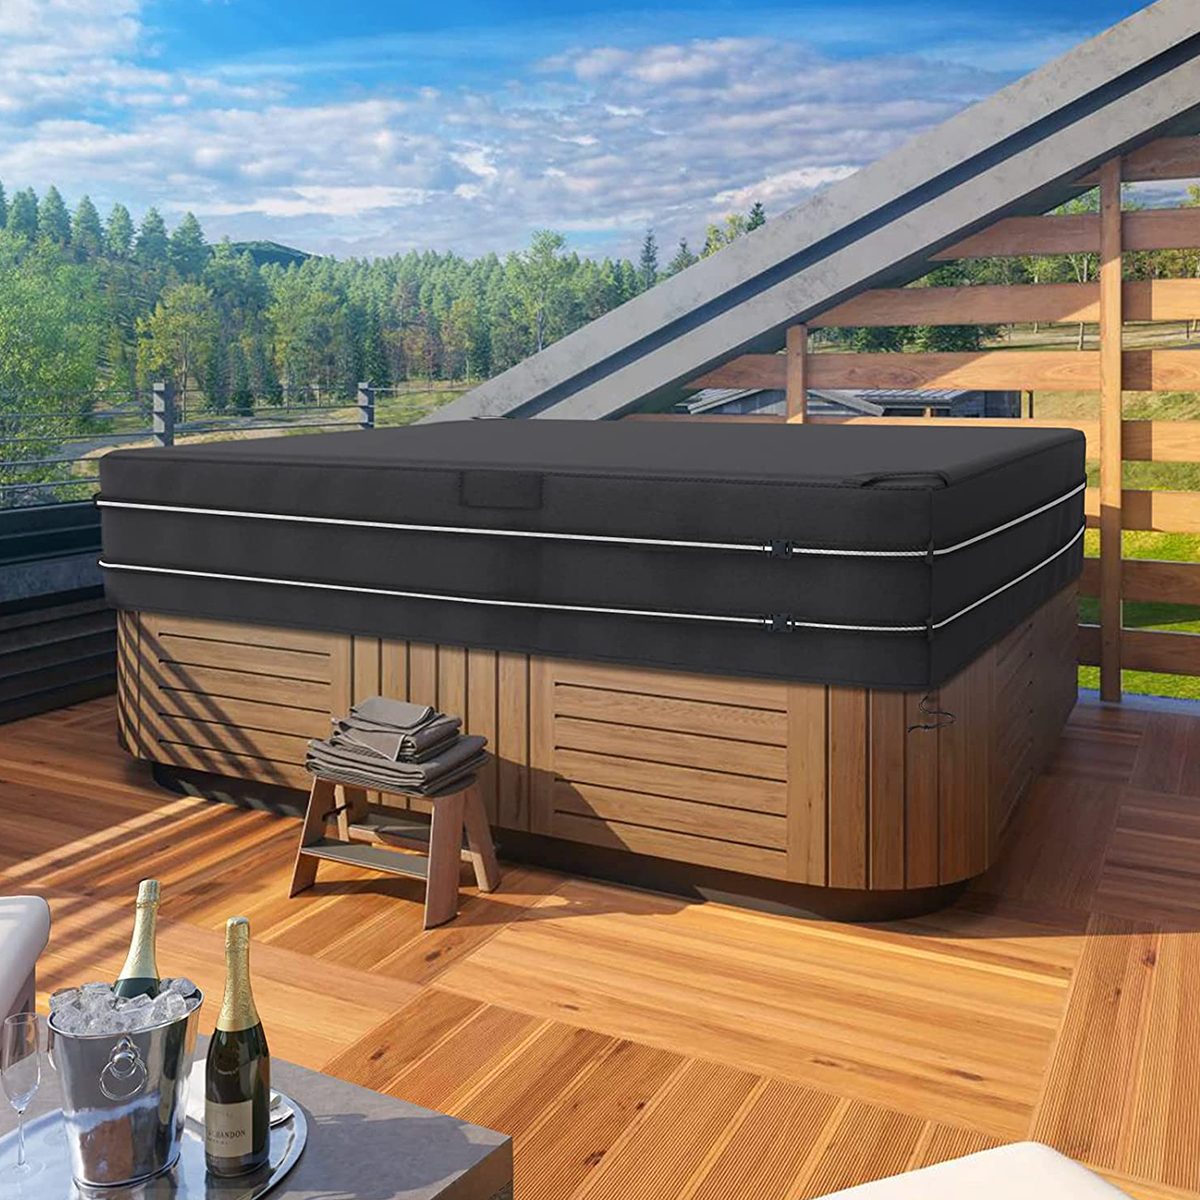 10 Hot Tub Covers to Keep Your Oasis Clean and Safe From the Elements